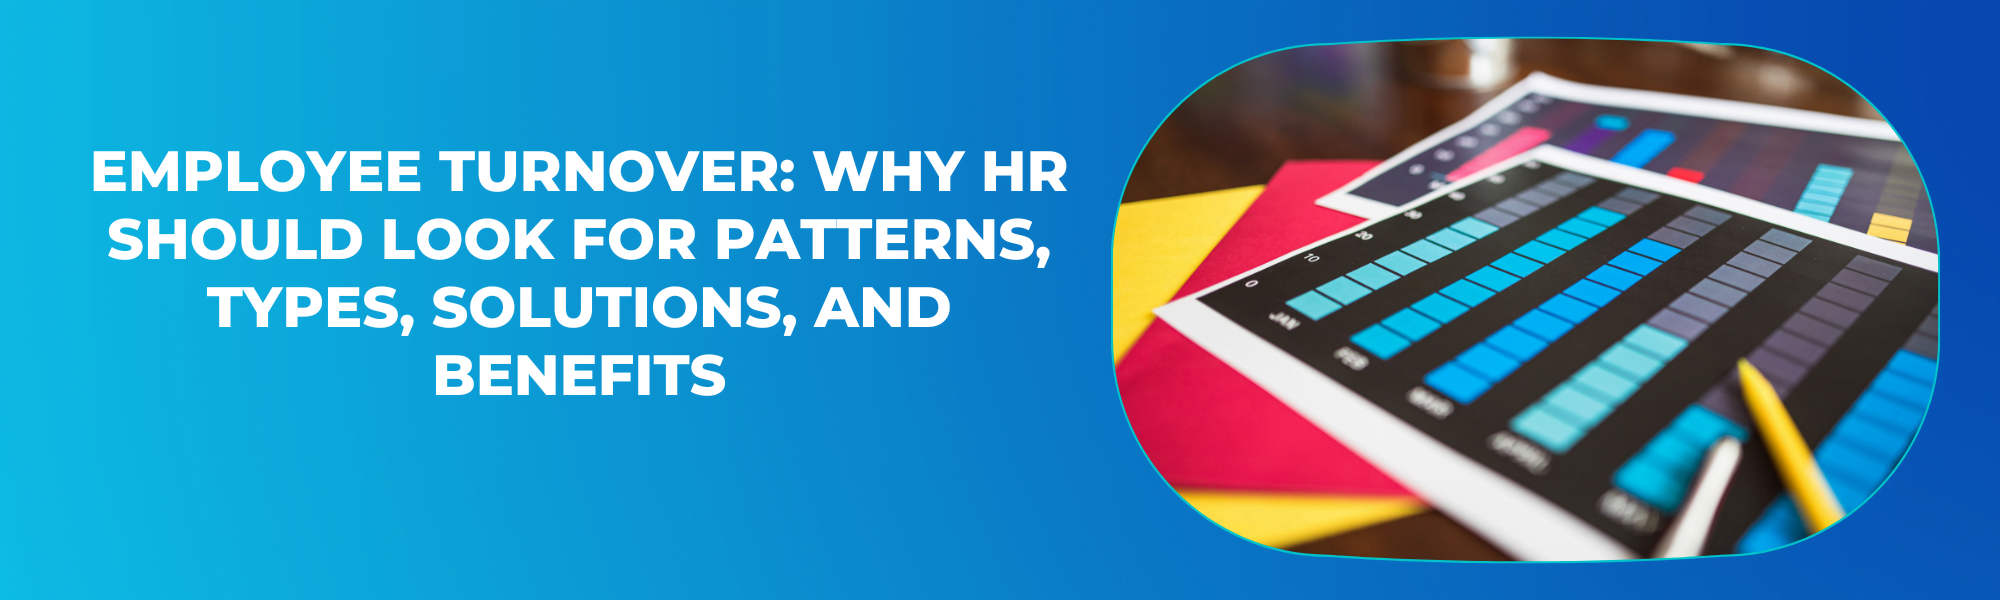 Employee Turnover: Why HRs Should Look for Patterns, Types, Solutions, and Benefits